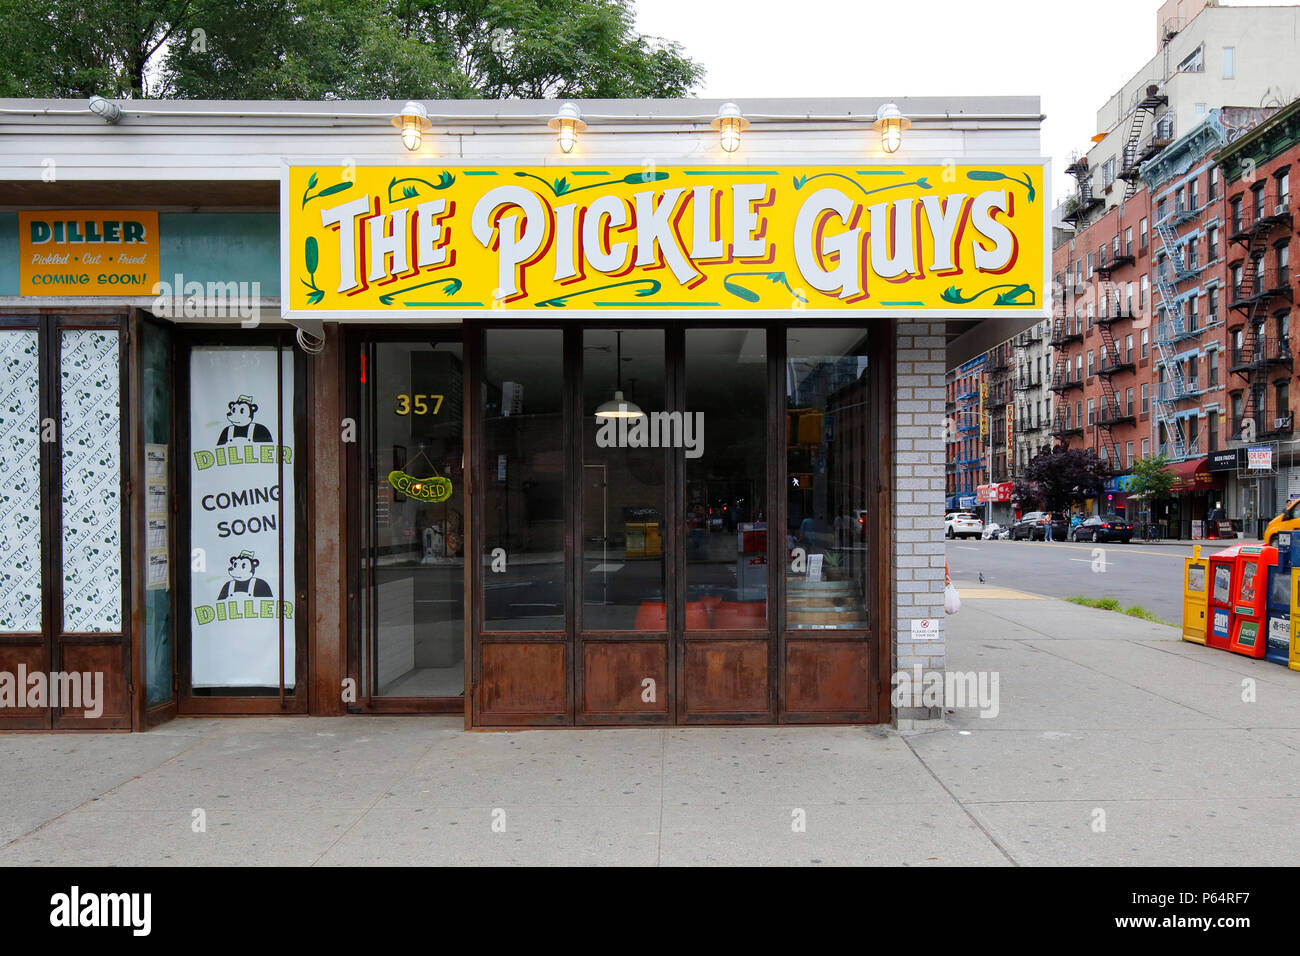 The Pickle Guys, 357 Grand Street New York, NY. exterior storefront of a pickle shop in the Lower East Side neighborhood of Manhattan. Stock Photo